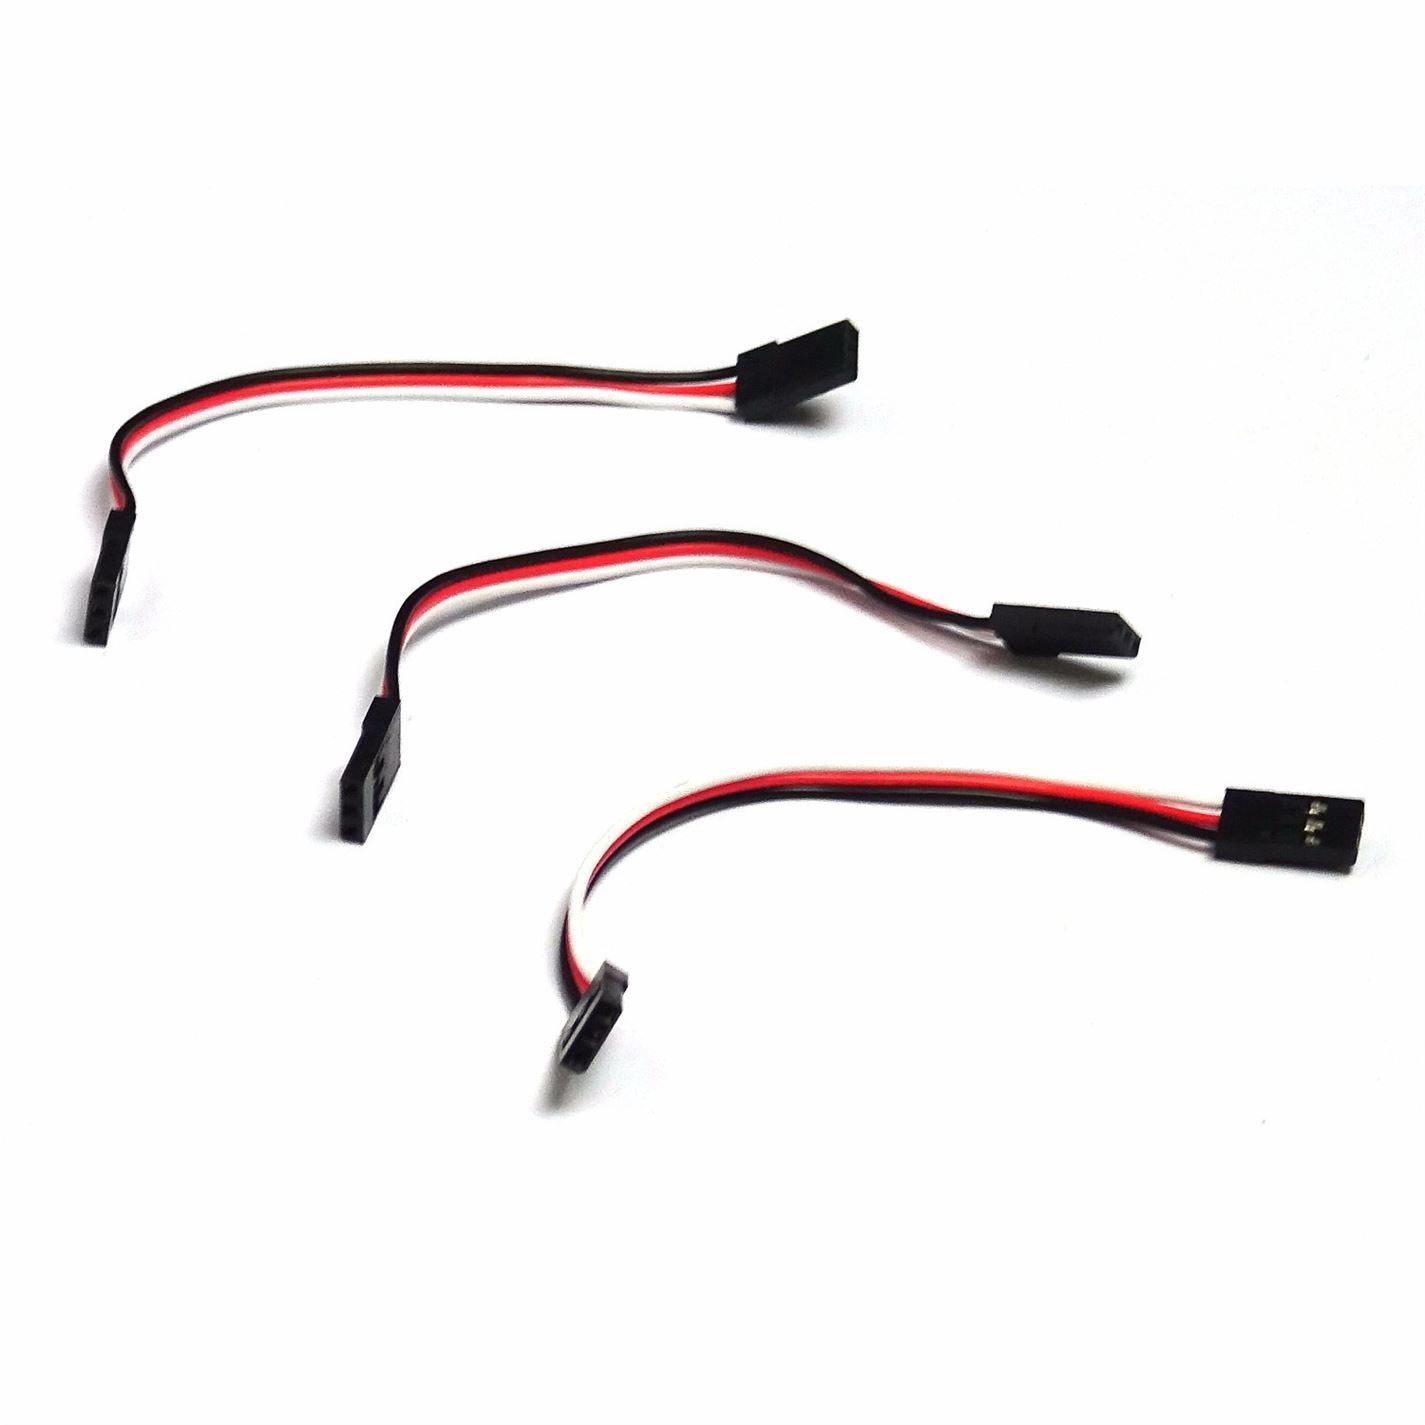 3x 100mm Servo Extension Lead Wire Cable MALE TO MALE KK MK MWC Flight Control - UK Seller